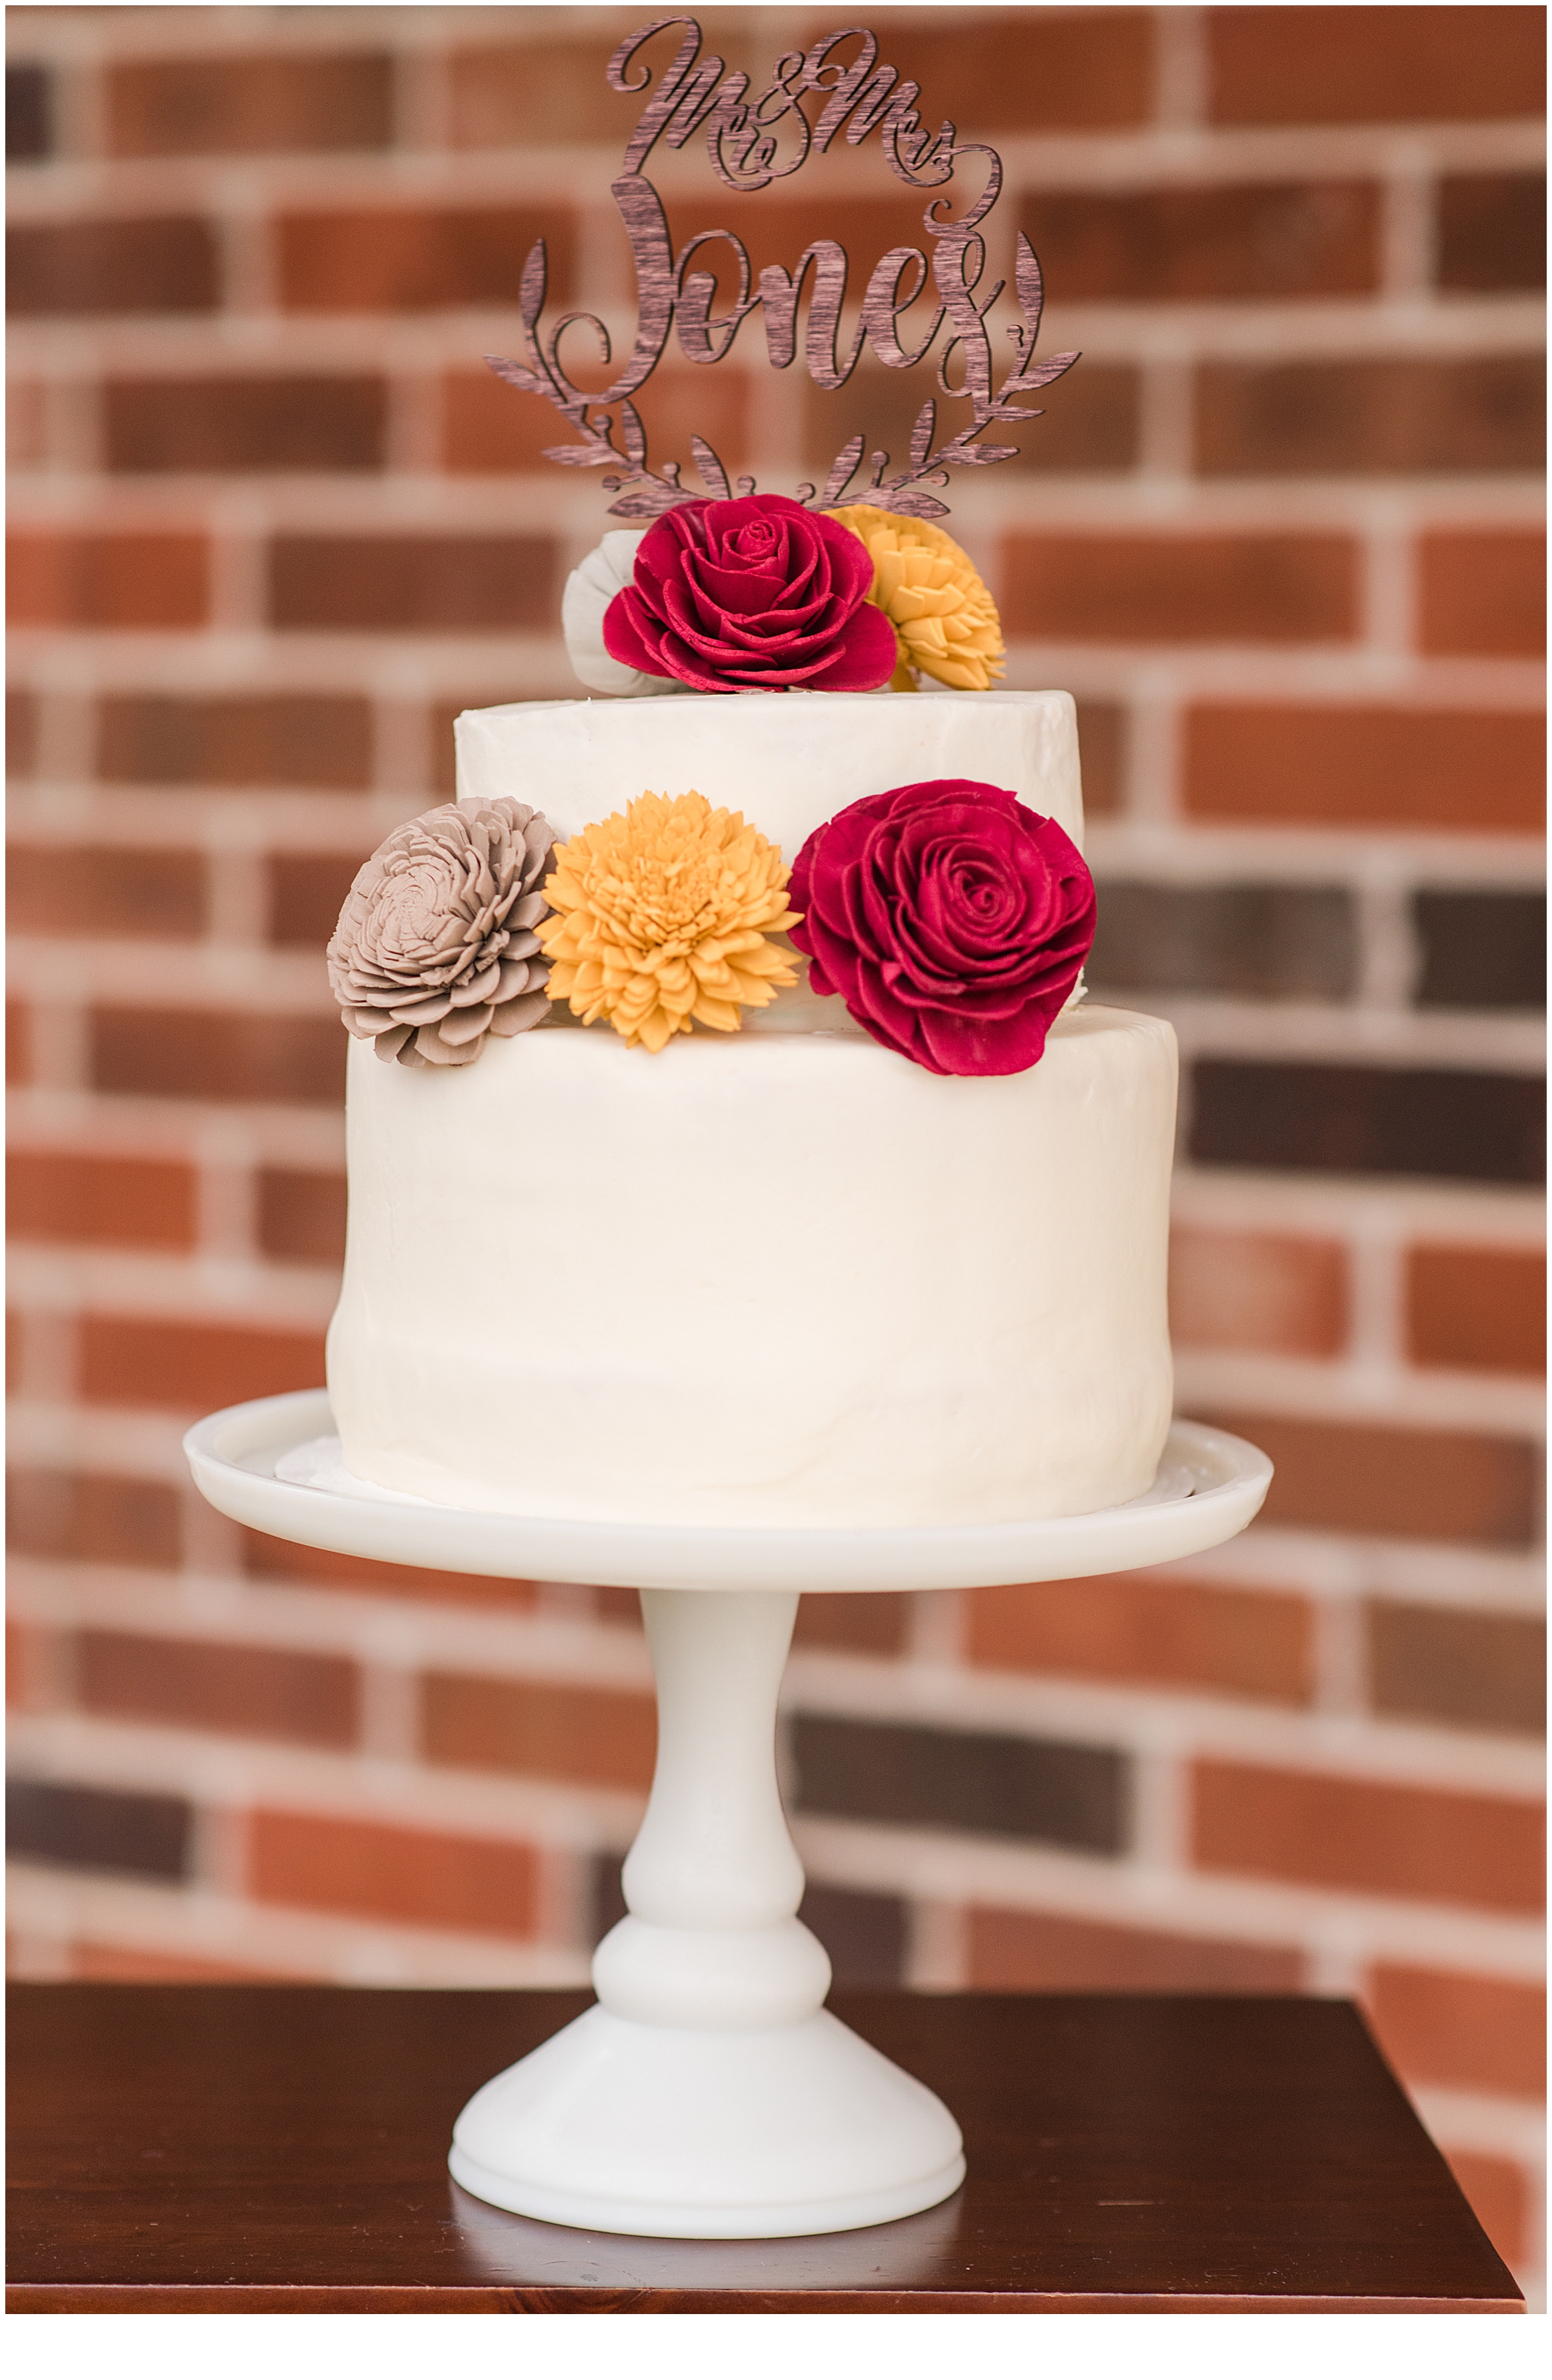 Wooden wedding flowers on a two-tier wedding cake for a Tennessee Farm Elopement.